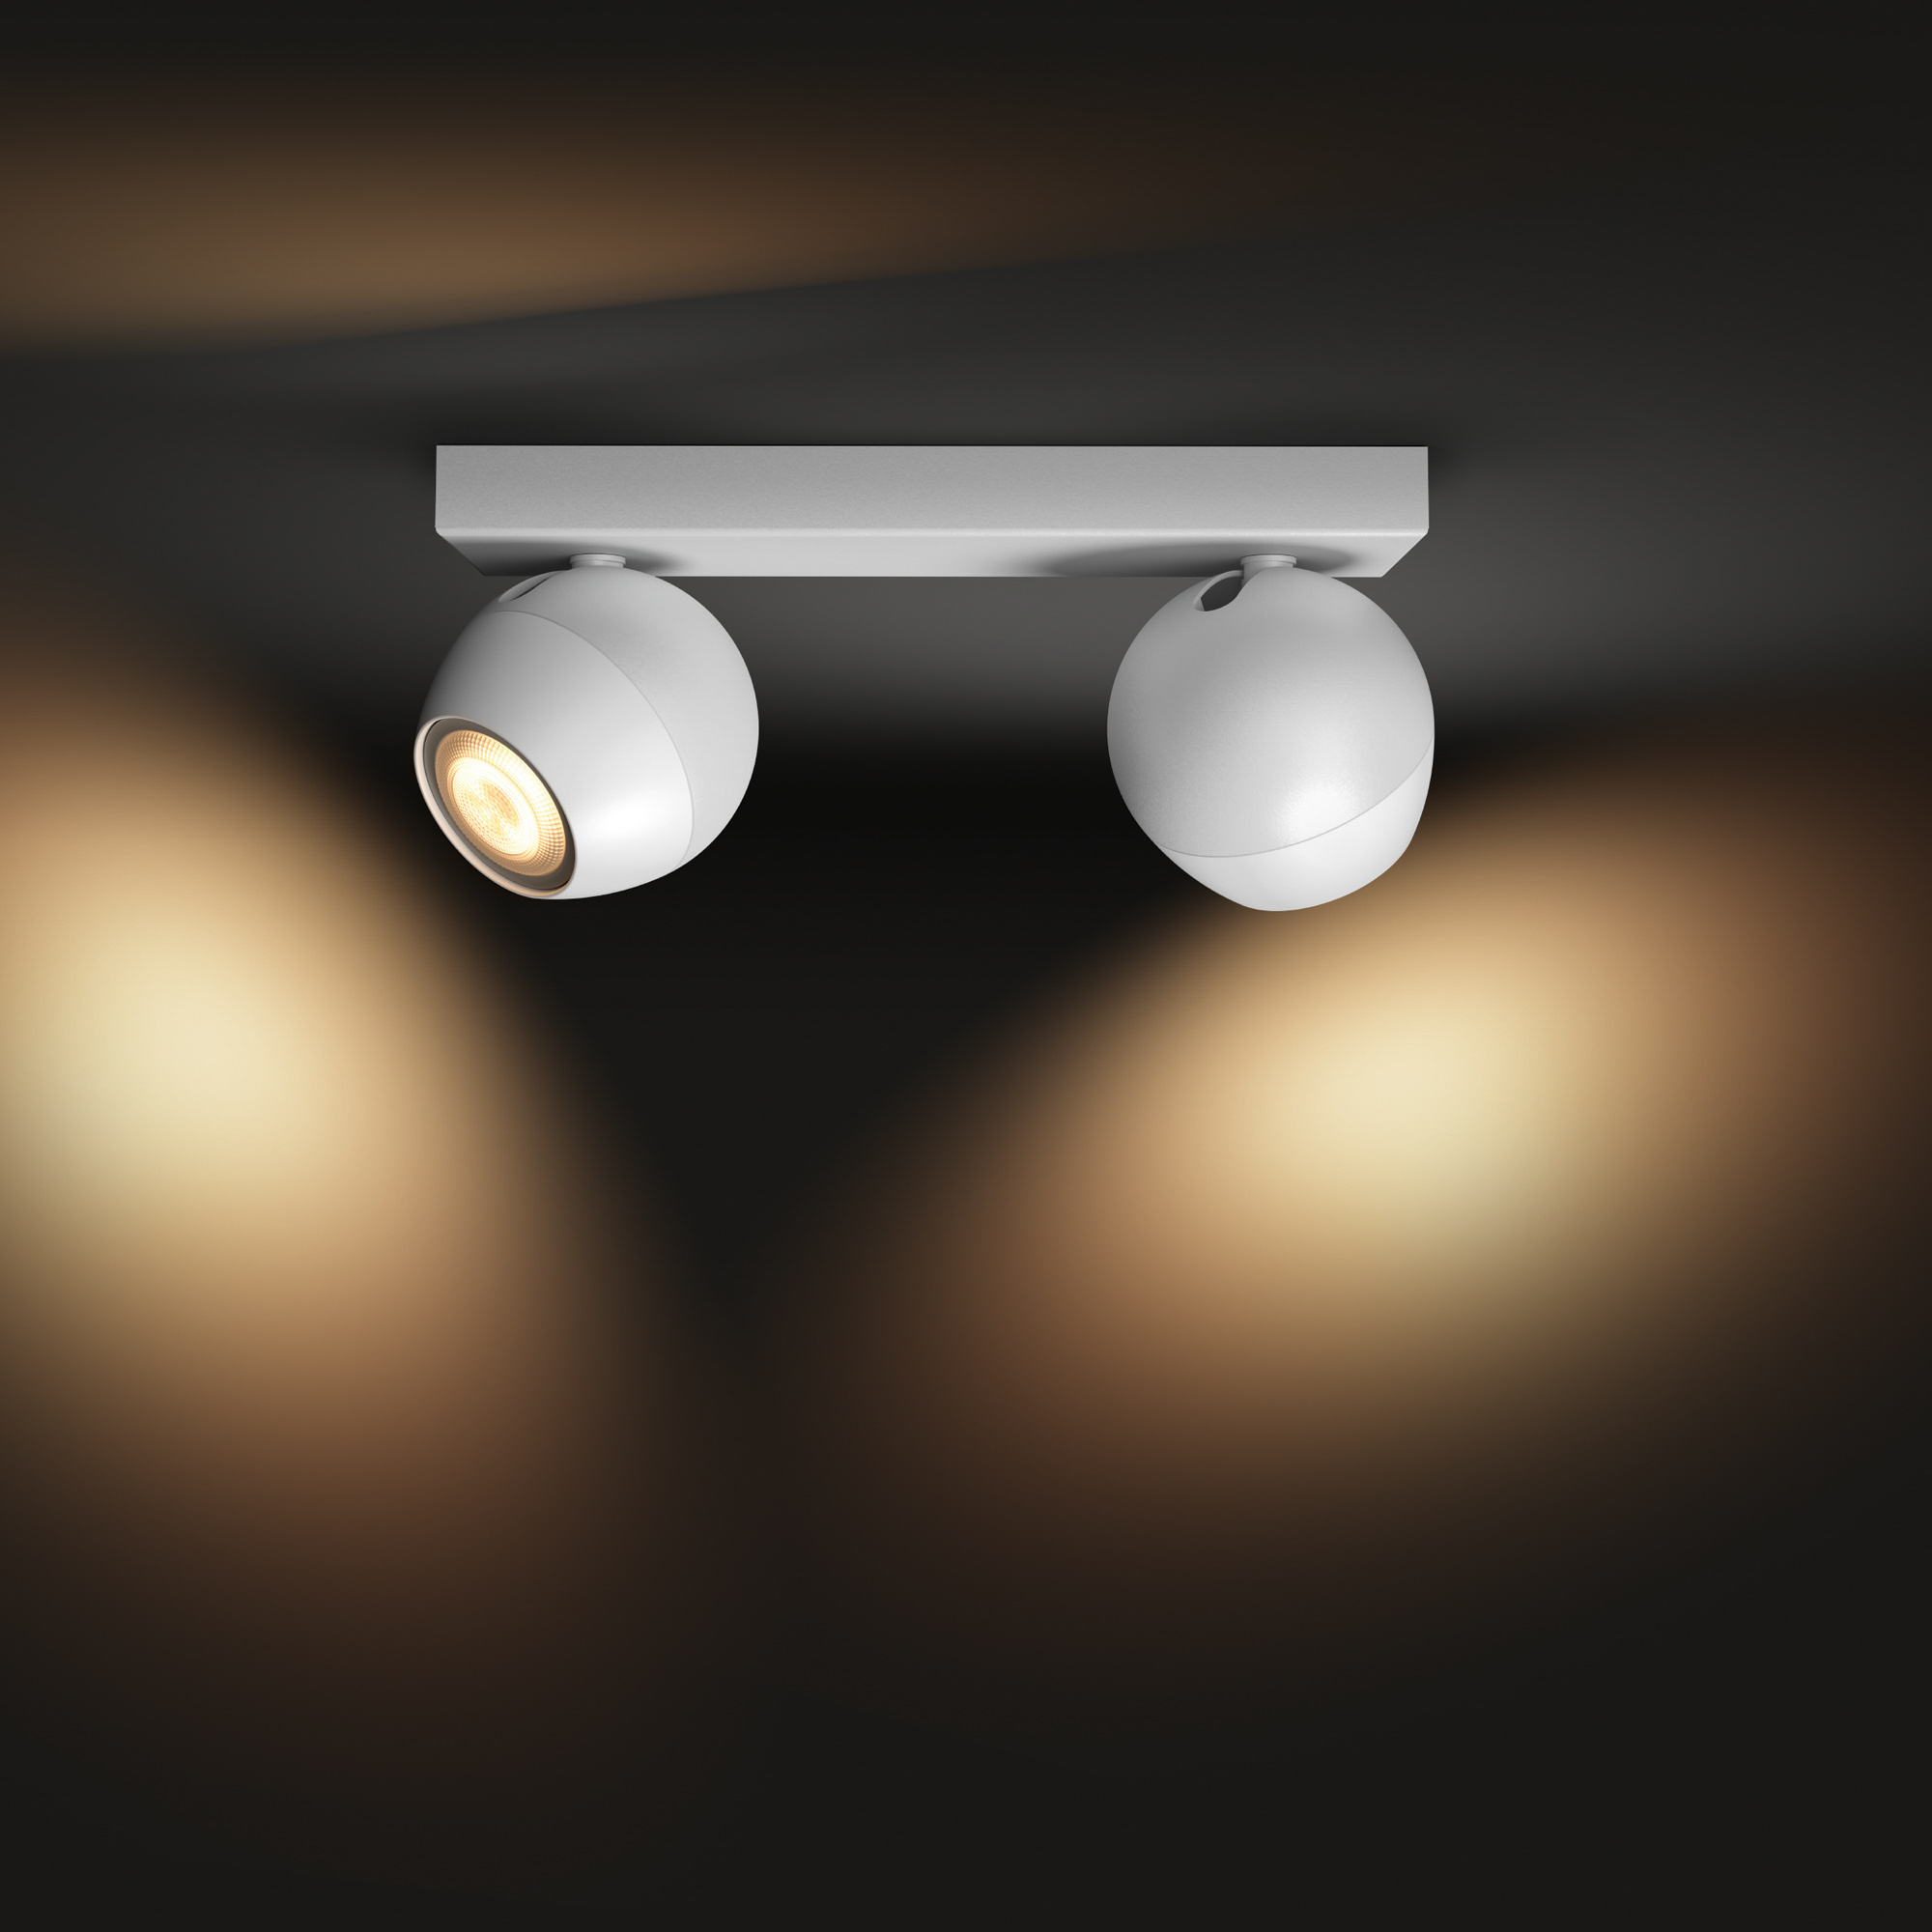 Spot Philips Hue alb Ambiance Buckram LED Spotlight double-flamed alb 2x 350lm incl. Buton Dimmer